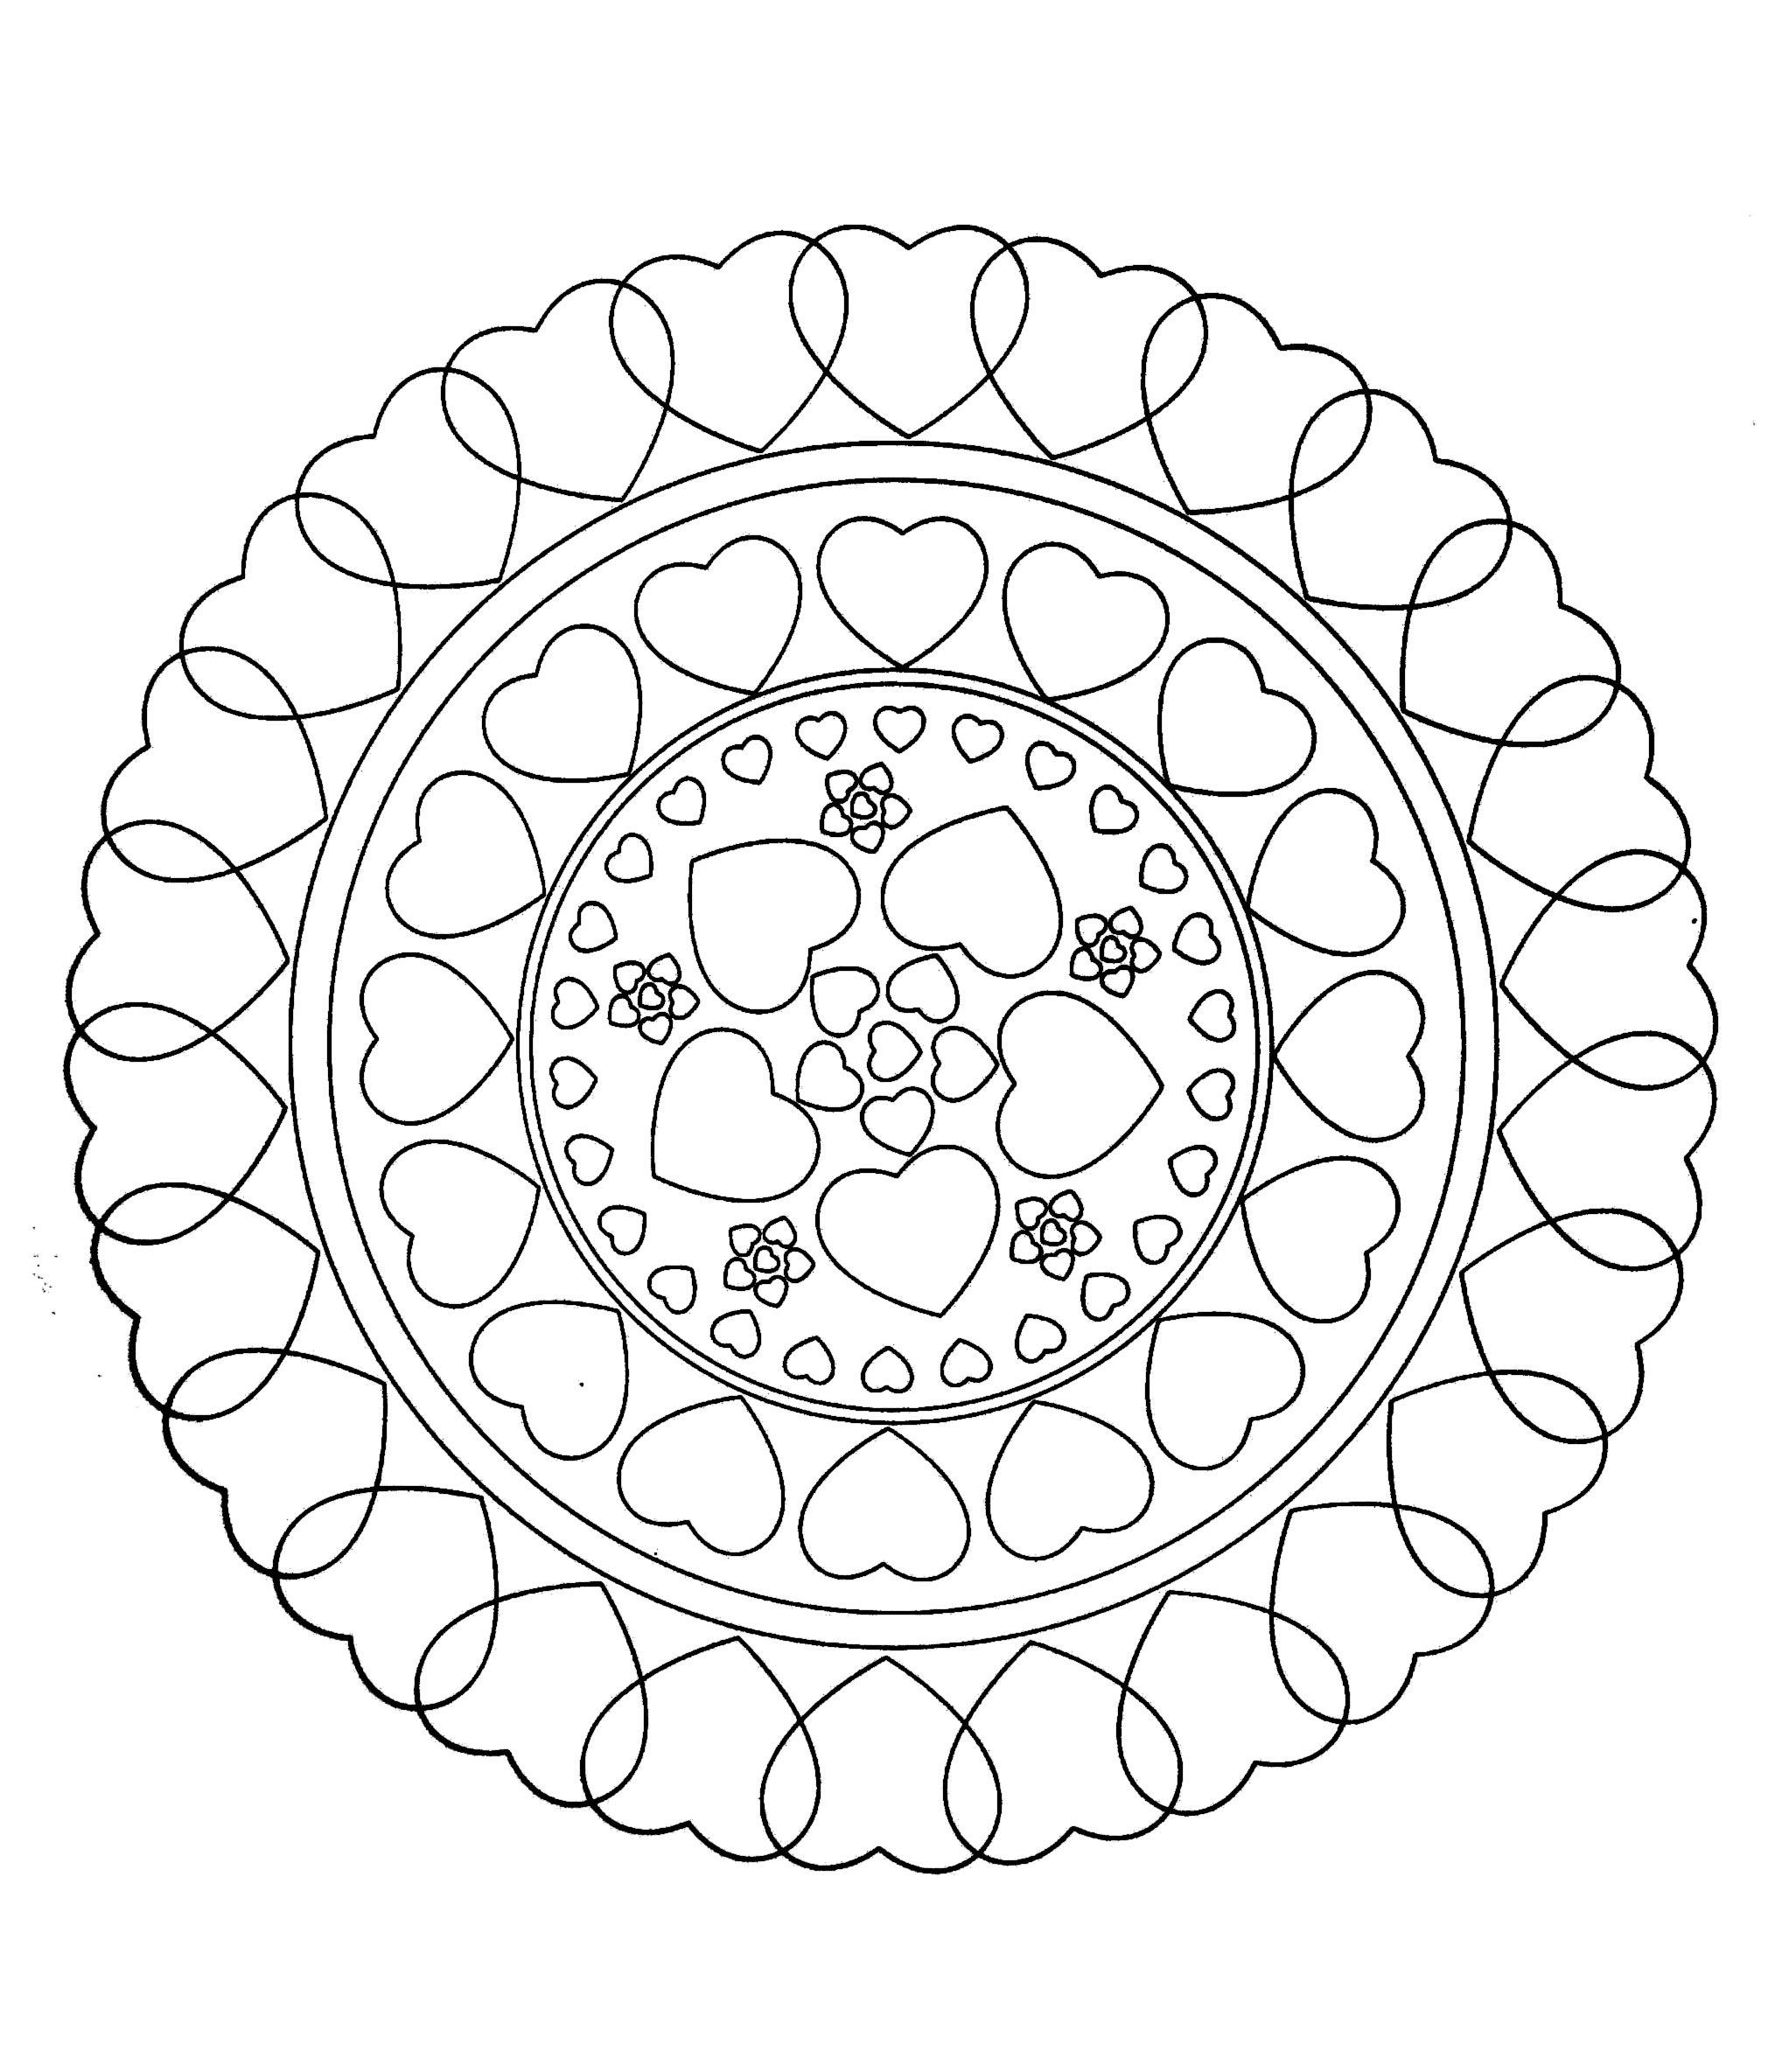  Free Simple Mandala Coloring Pages for Kids